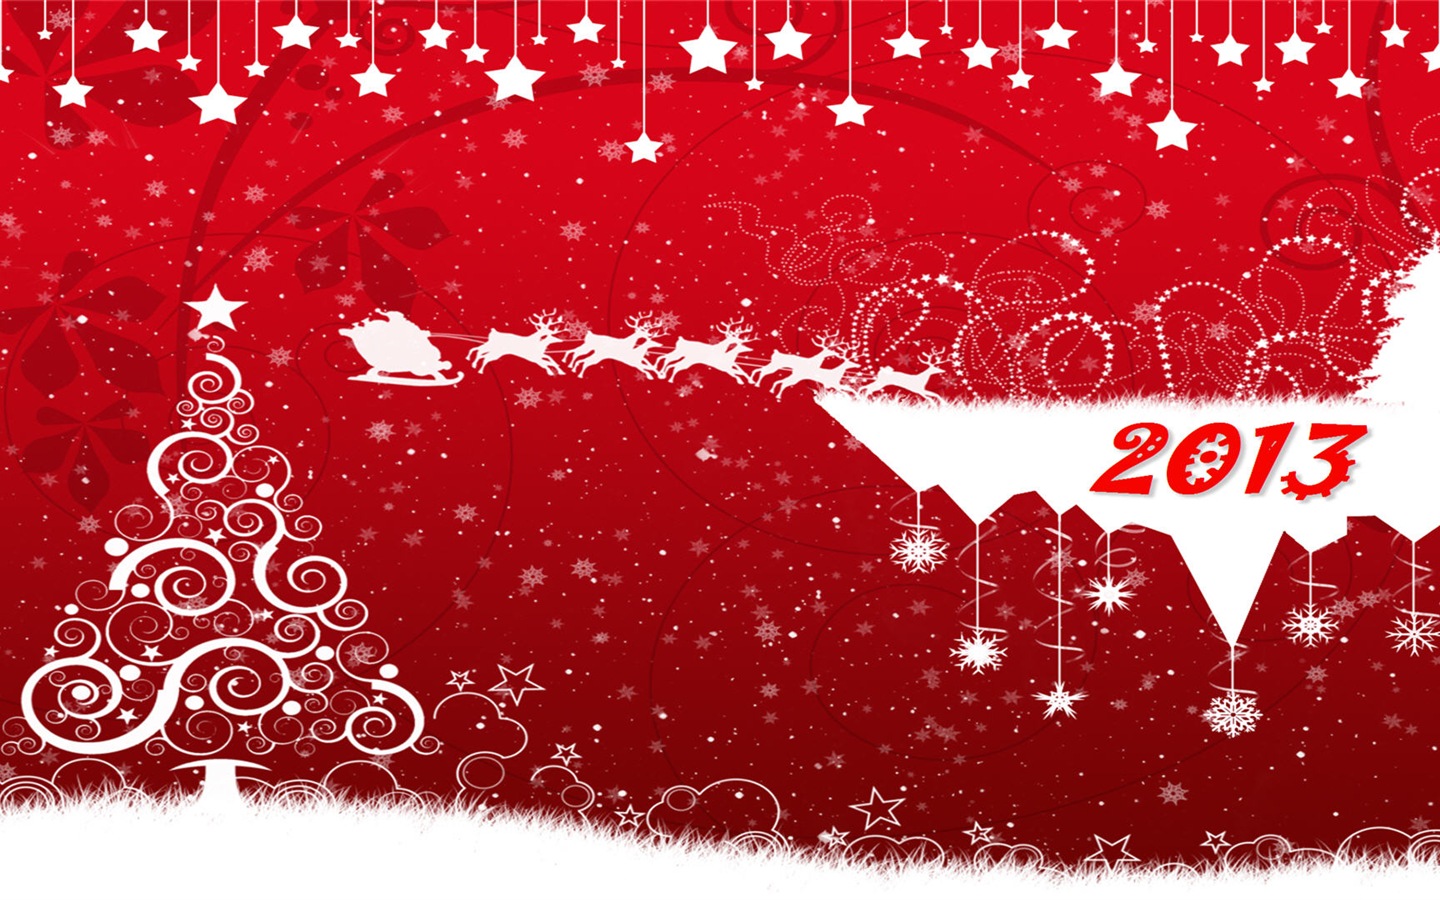 2013 Happy New Year HD wallpapers #13 - 1440x900